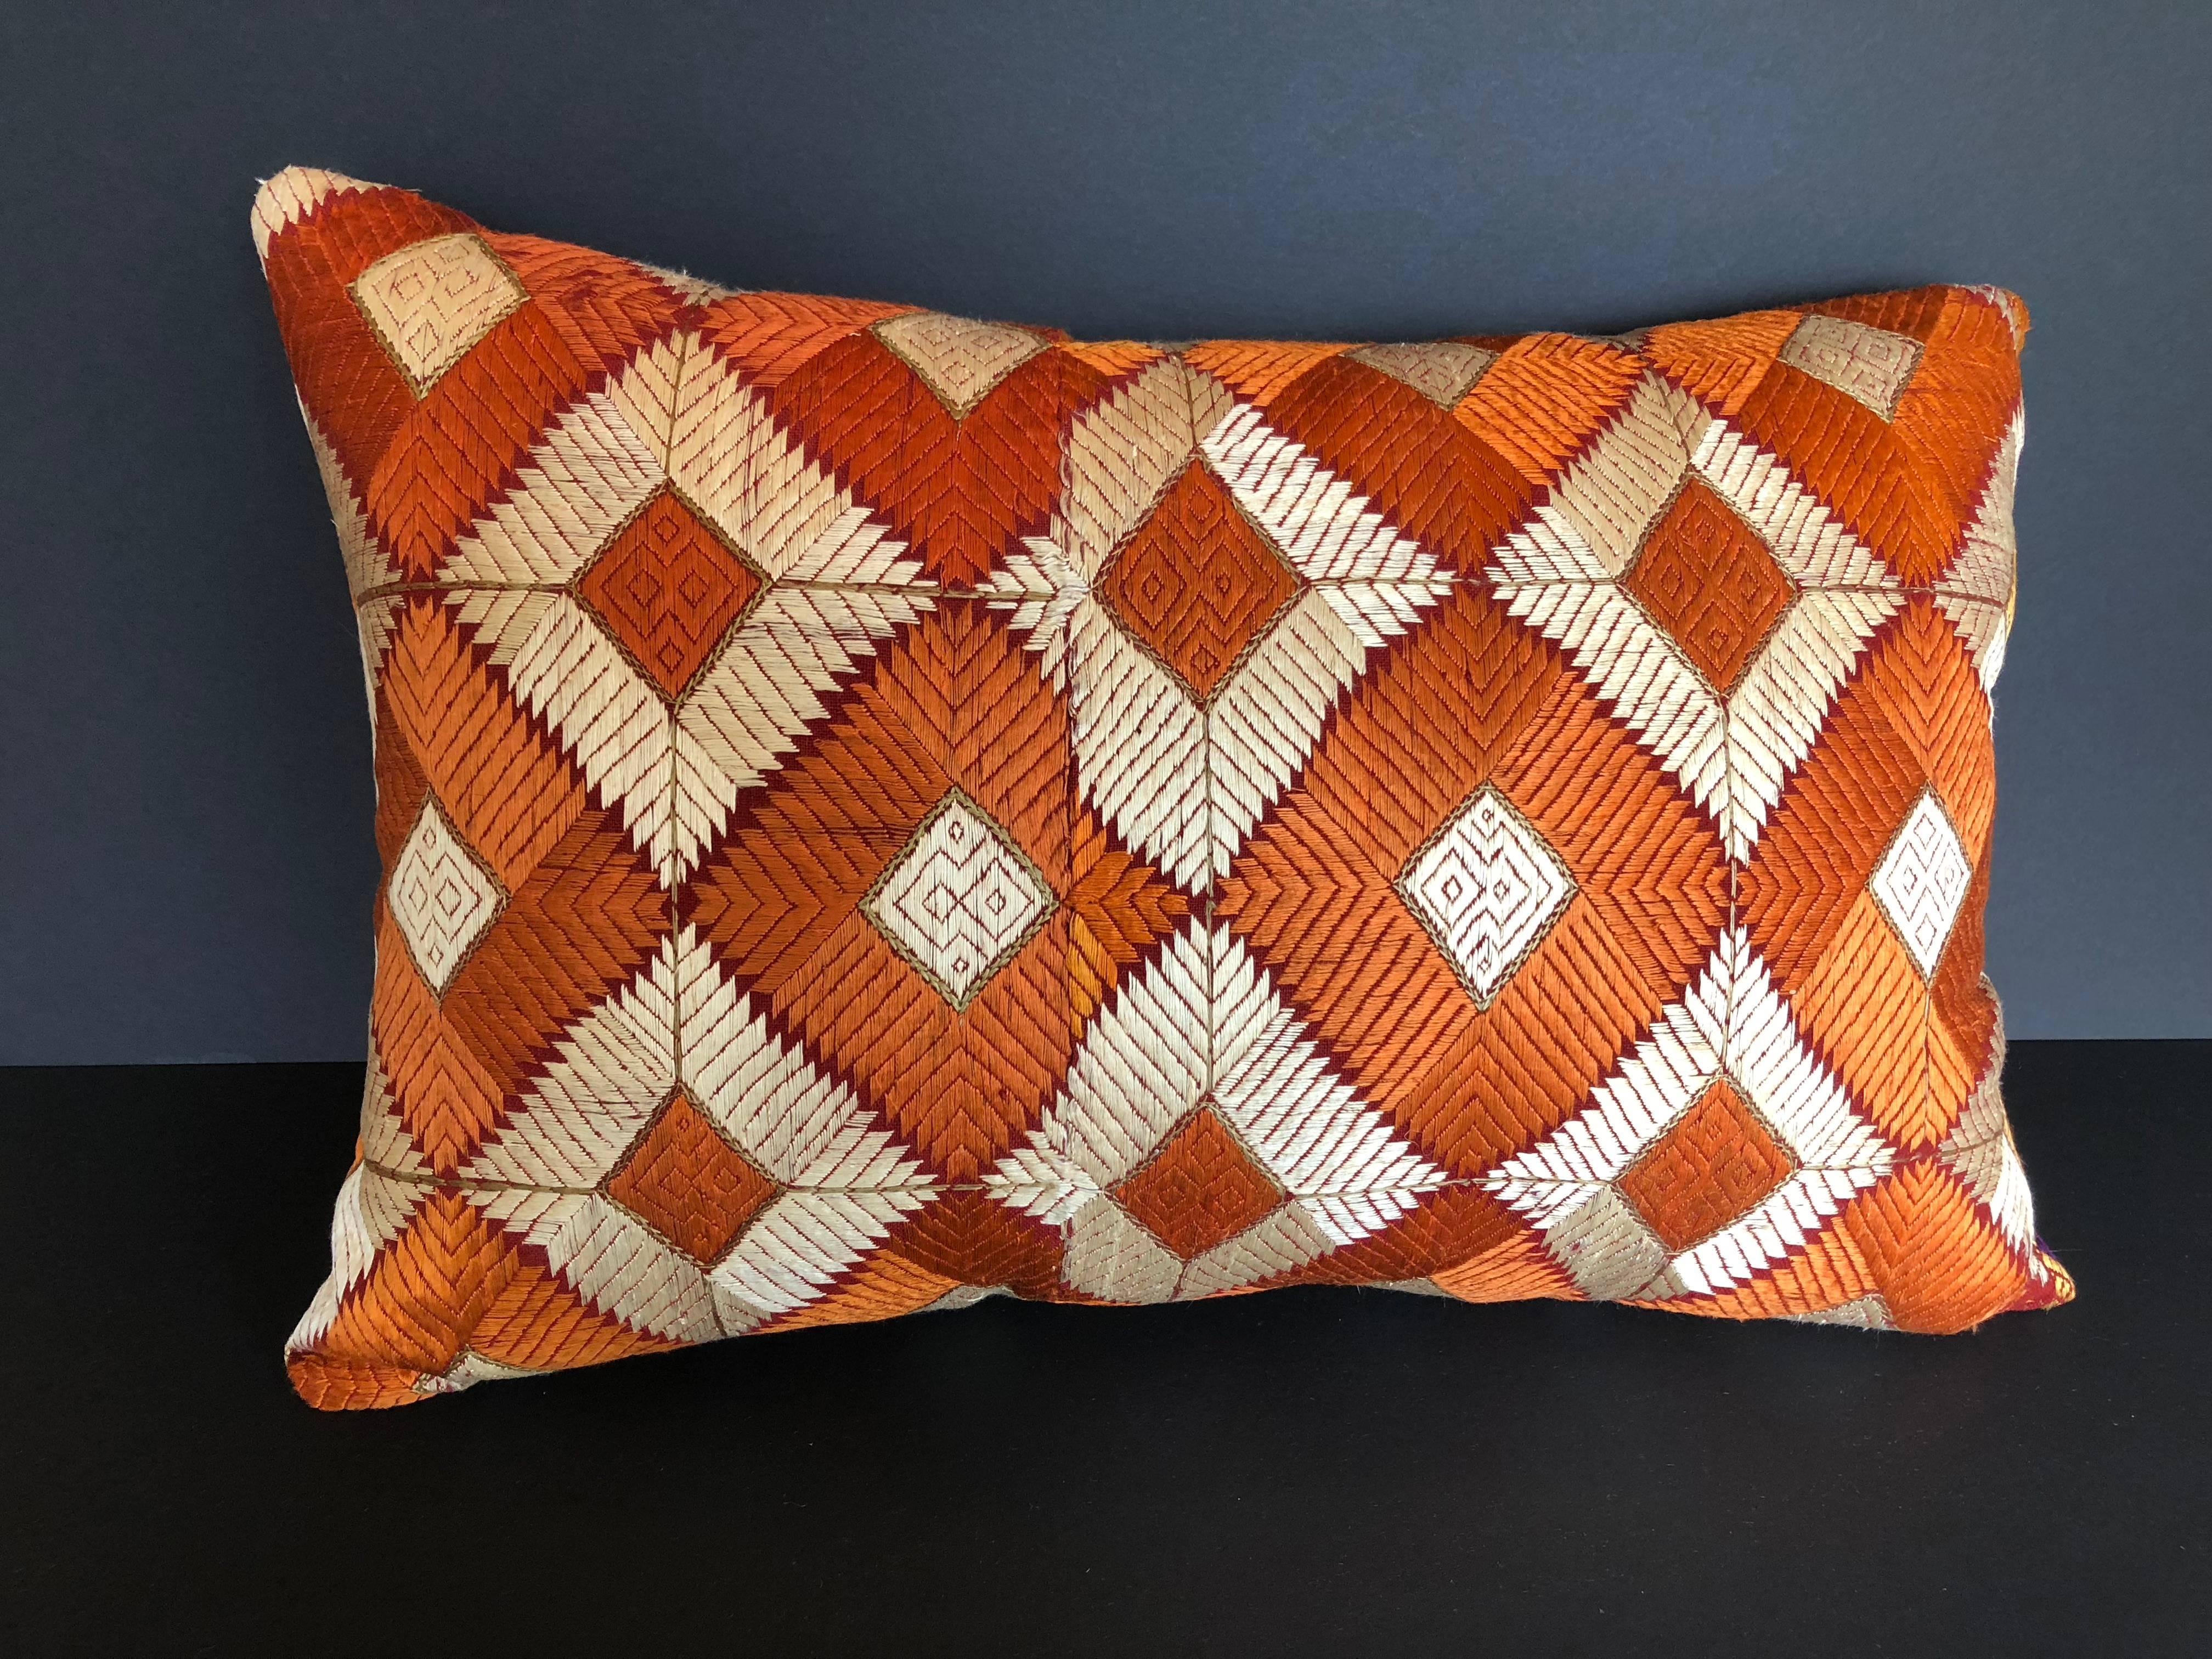 Custom pillow cut from a vintage phulkari bagh wedding shawl from Punjab, India. Hand loomed cotton Khadi cloth is hand embroidered with vibrant silk threads. The shawl is made by the relatives of the young bride and worn at her wedding and other